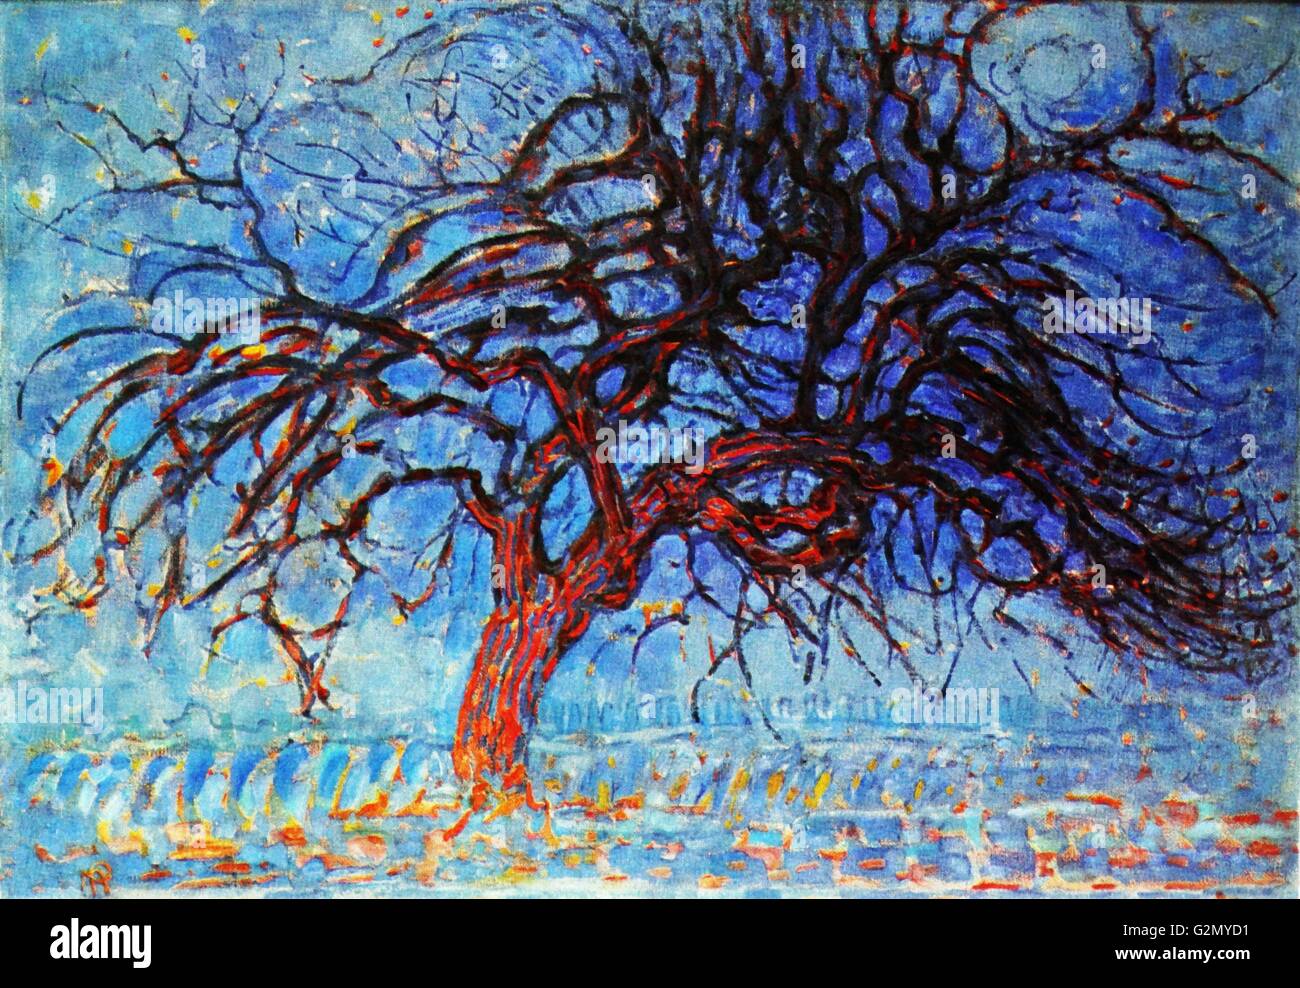 Painting by the famous Dutch artist Piet Mondrian (7th March 1872 - 1st February 1944), work titled 'The red tree' Painted in 1908. Stock Photo